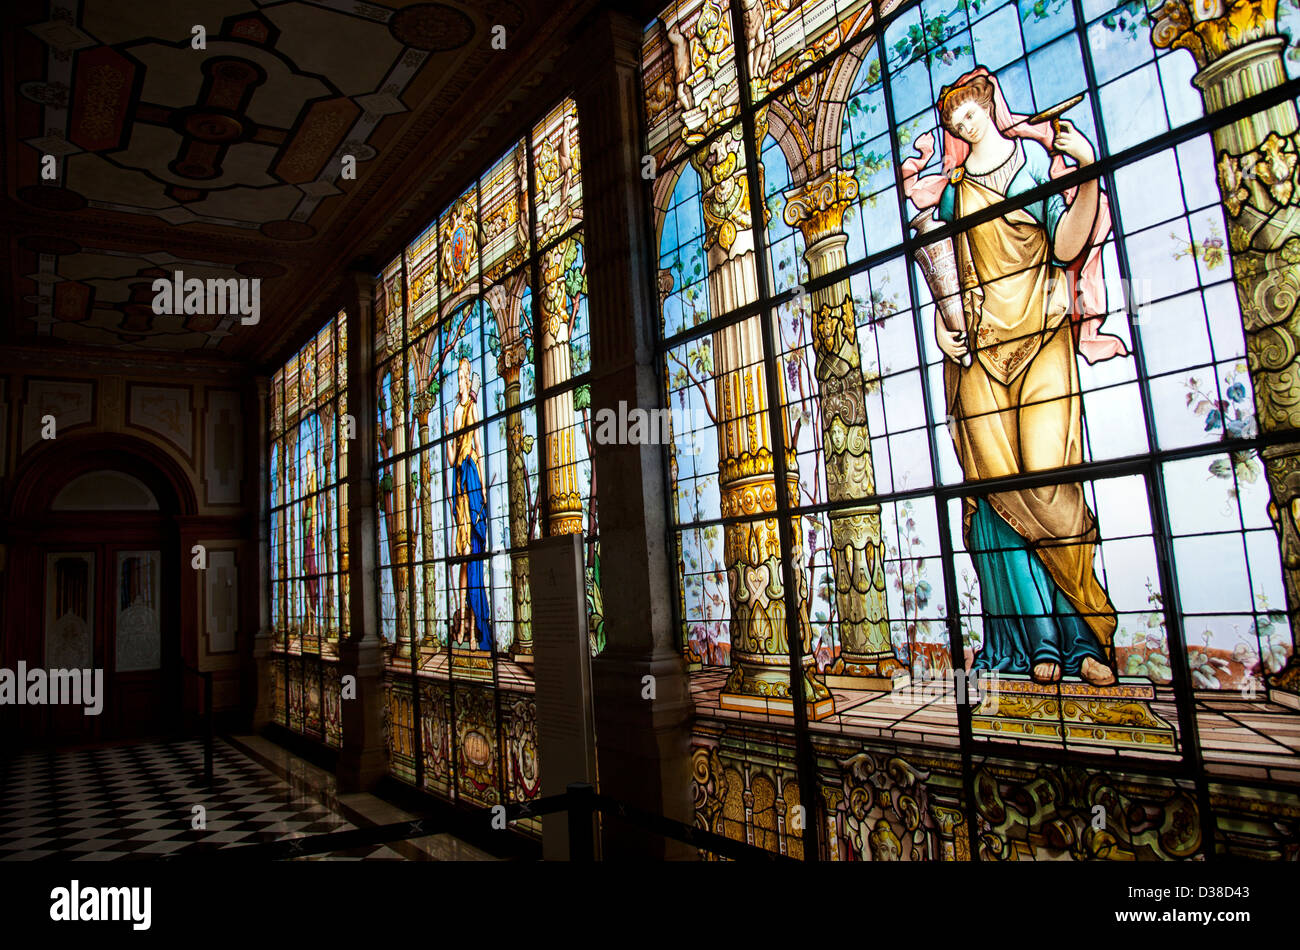 Stained Glass Gallery at Chapultepec Castle in Mexico City DF - Bathroom Stock Photo